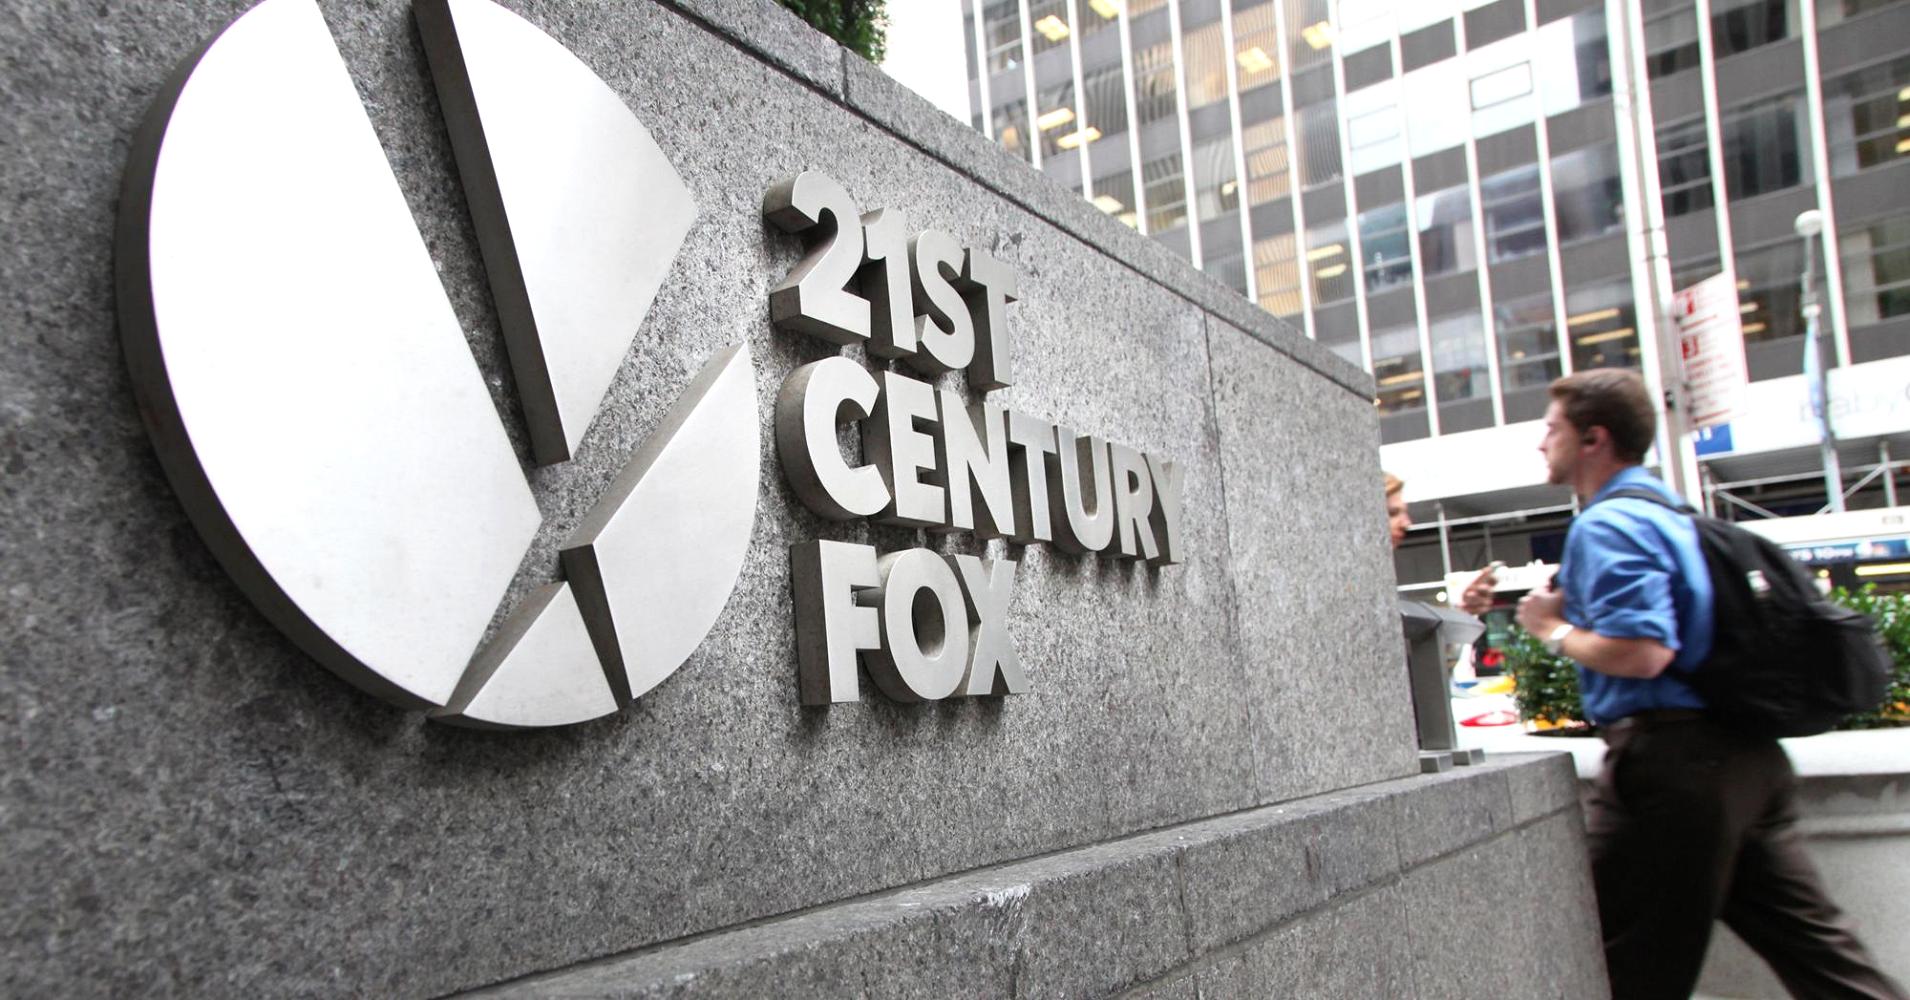 Comcast, Verizon approached Twenty-First Century Fox to buy some assets